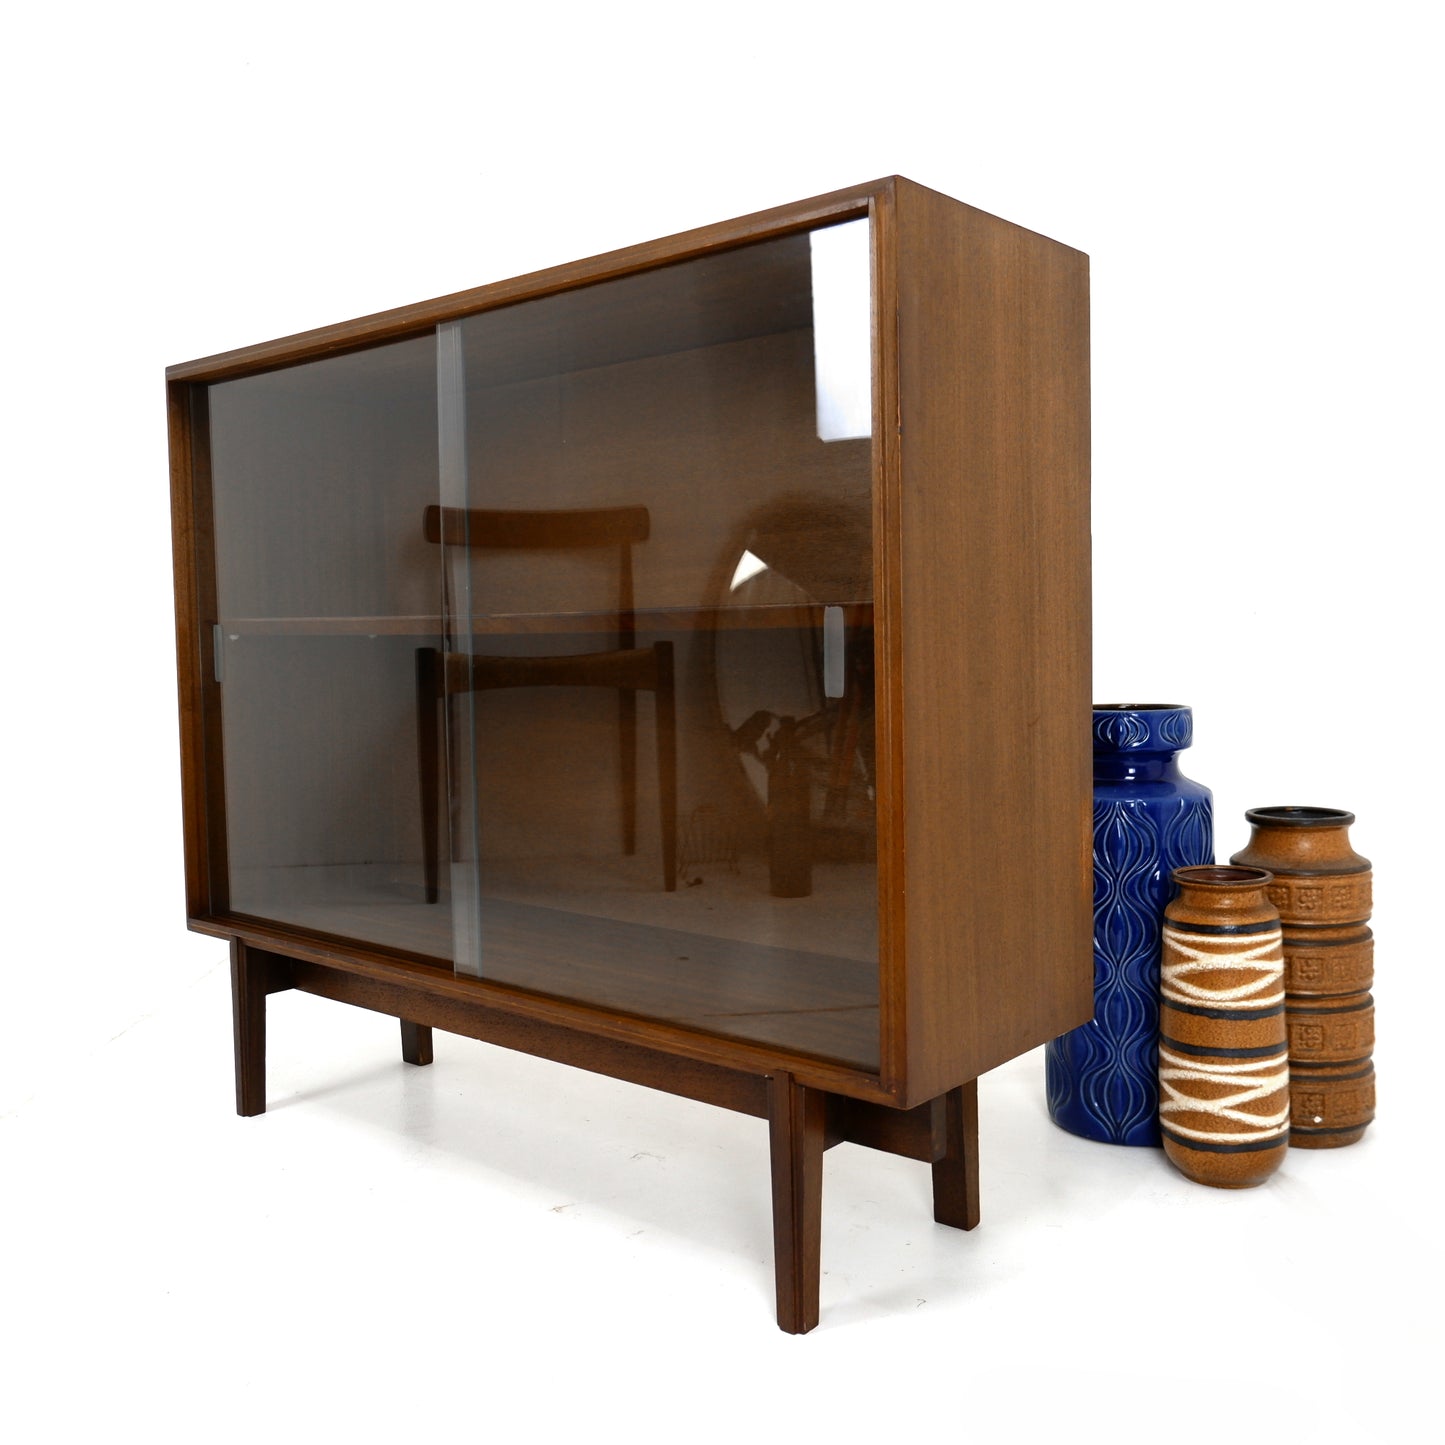 Mid Century Rosewood Glass Fronted Cabinet / Bookcase by Robert Heritage for Beaver & Tapley